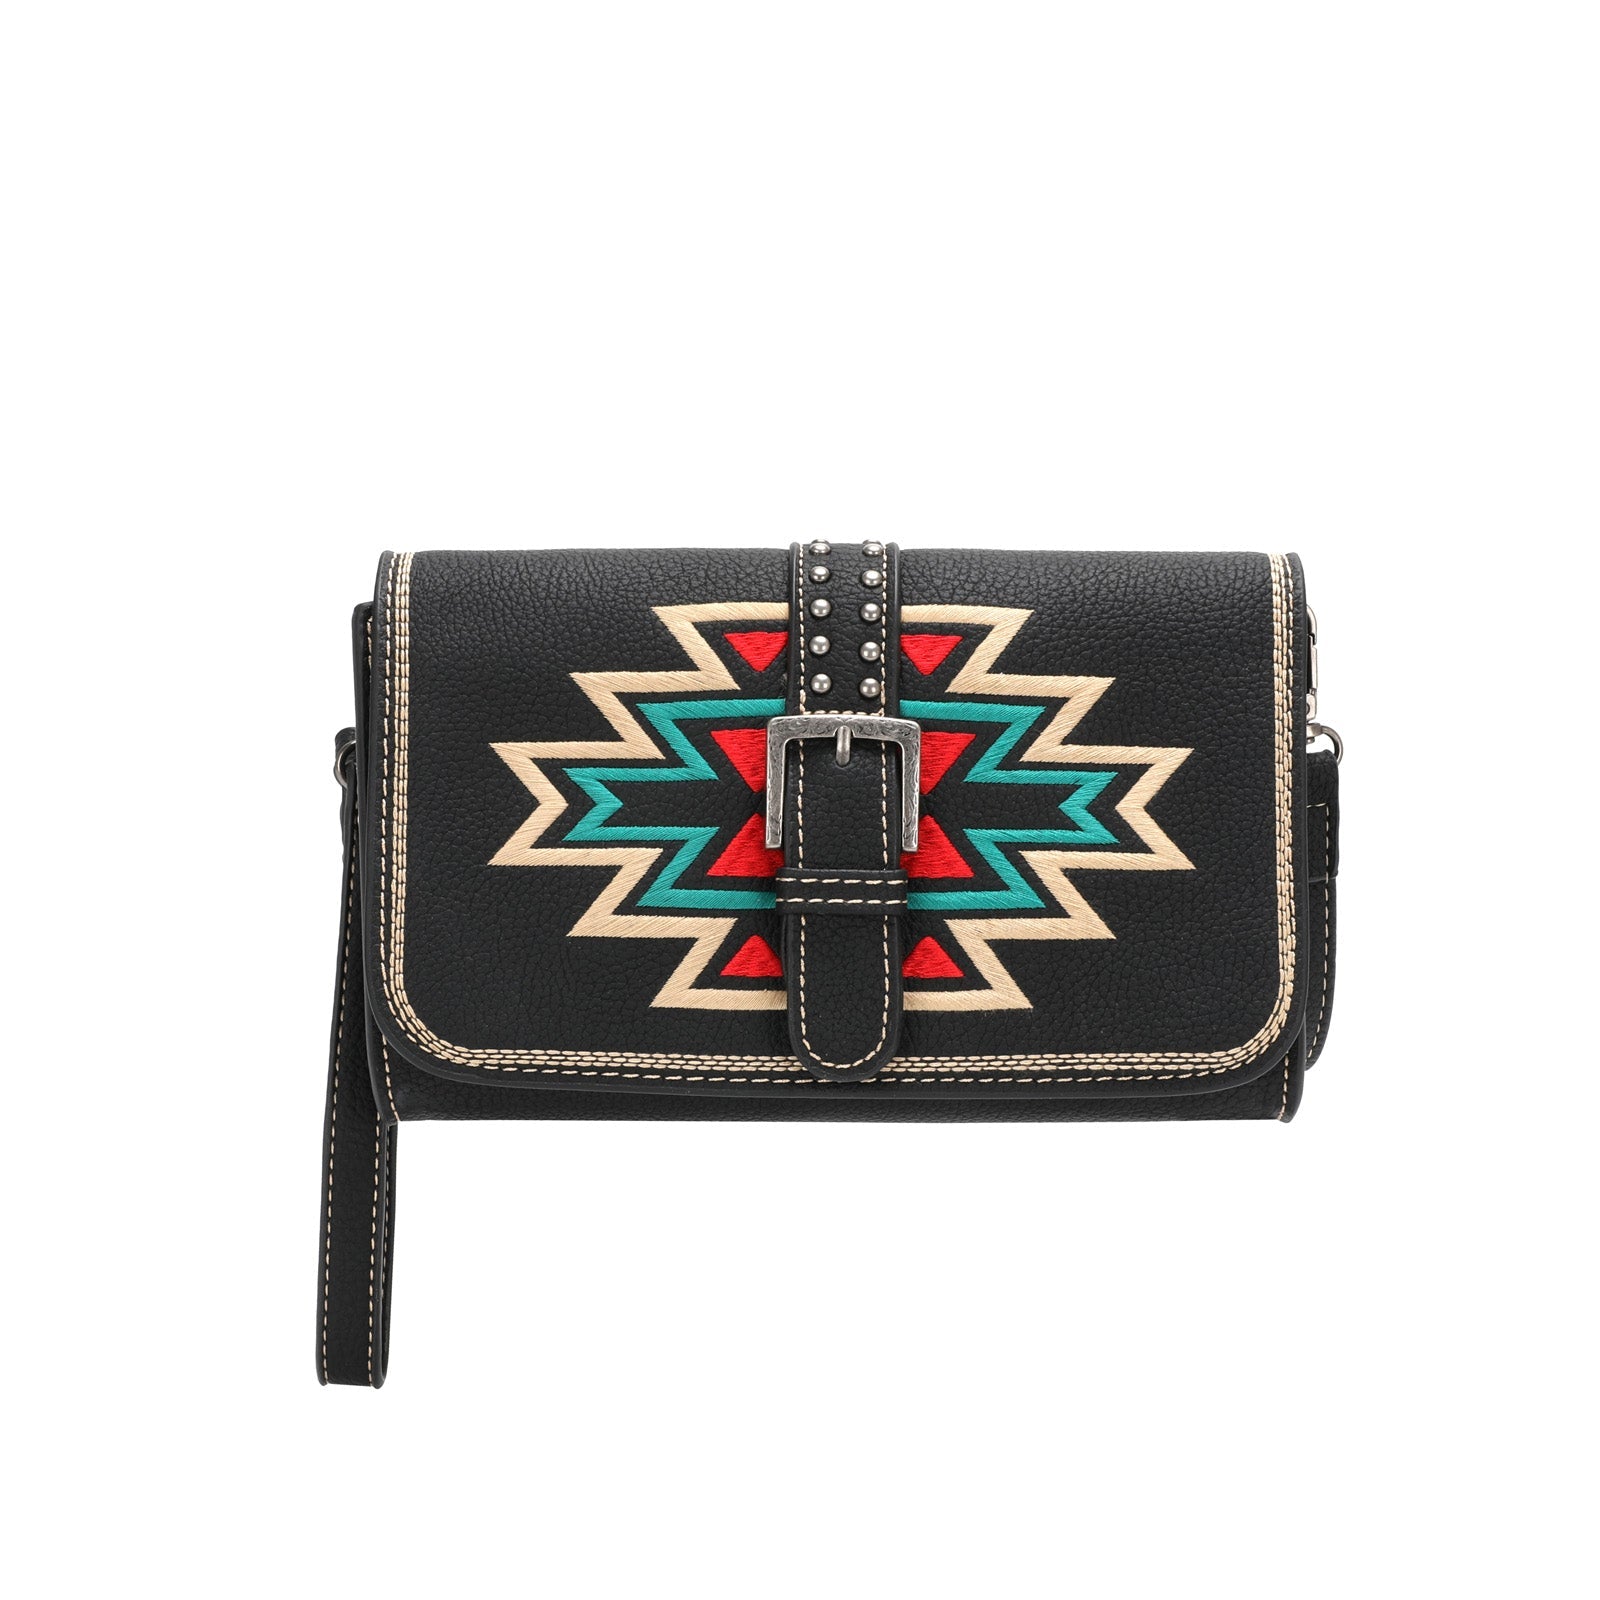 Montana West Aztec Collection Wallet/Crossbody - Cowgirl Wear